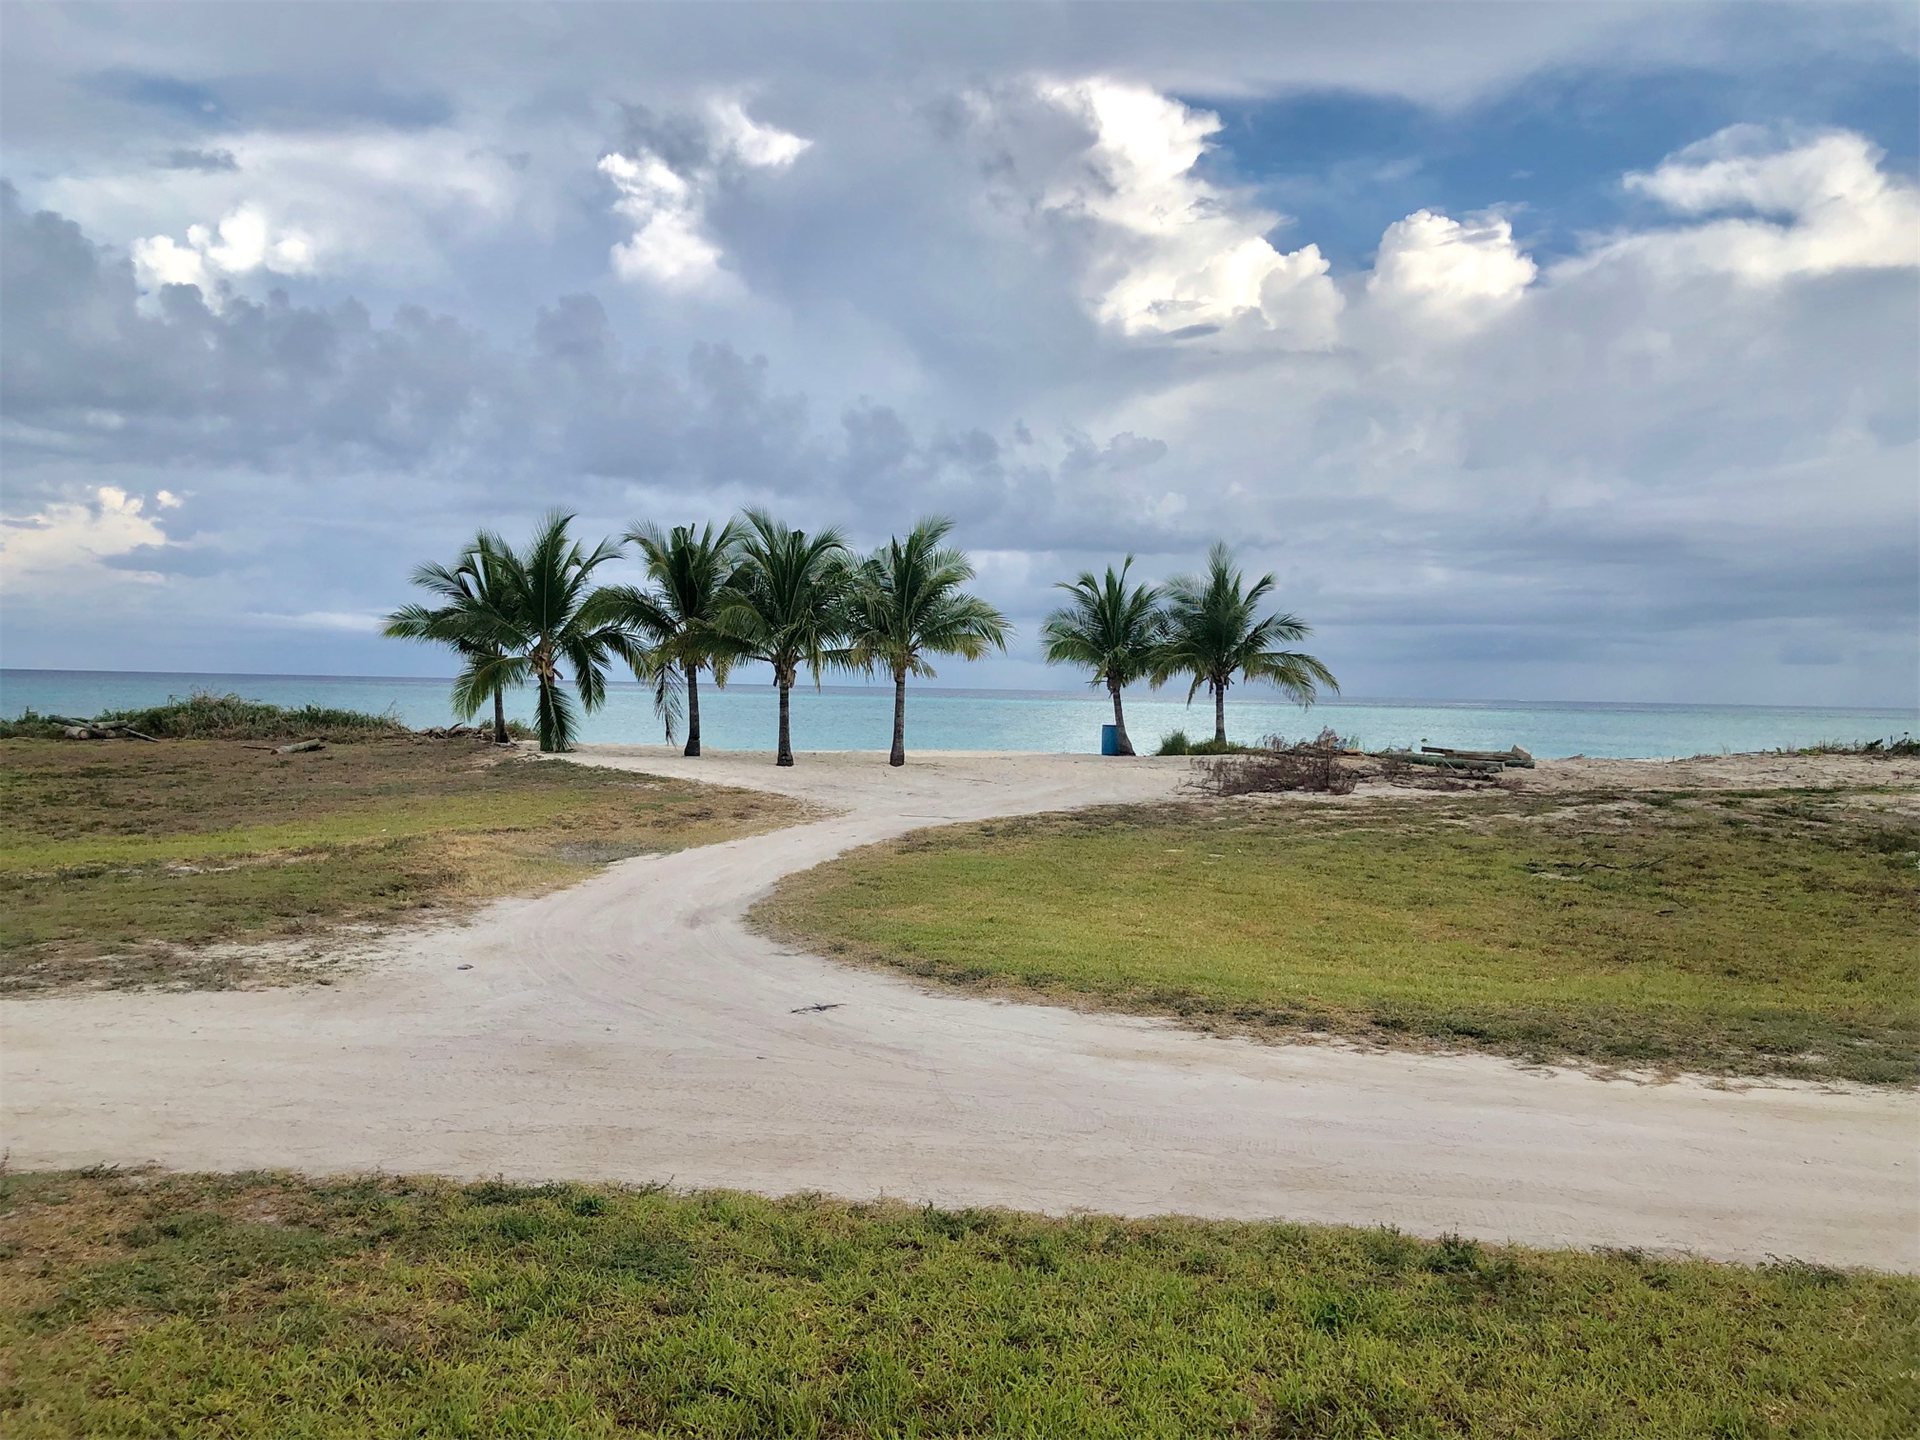 3. Land / Vacant Lot for Sale at #44 Block #1 Port Royale South Bimini South Bimini, Bimini #44 BLOCK #1 Bahamas